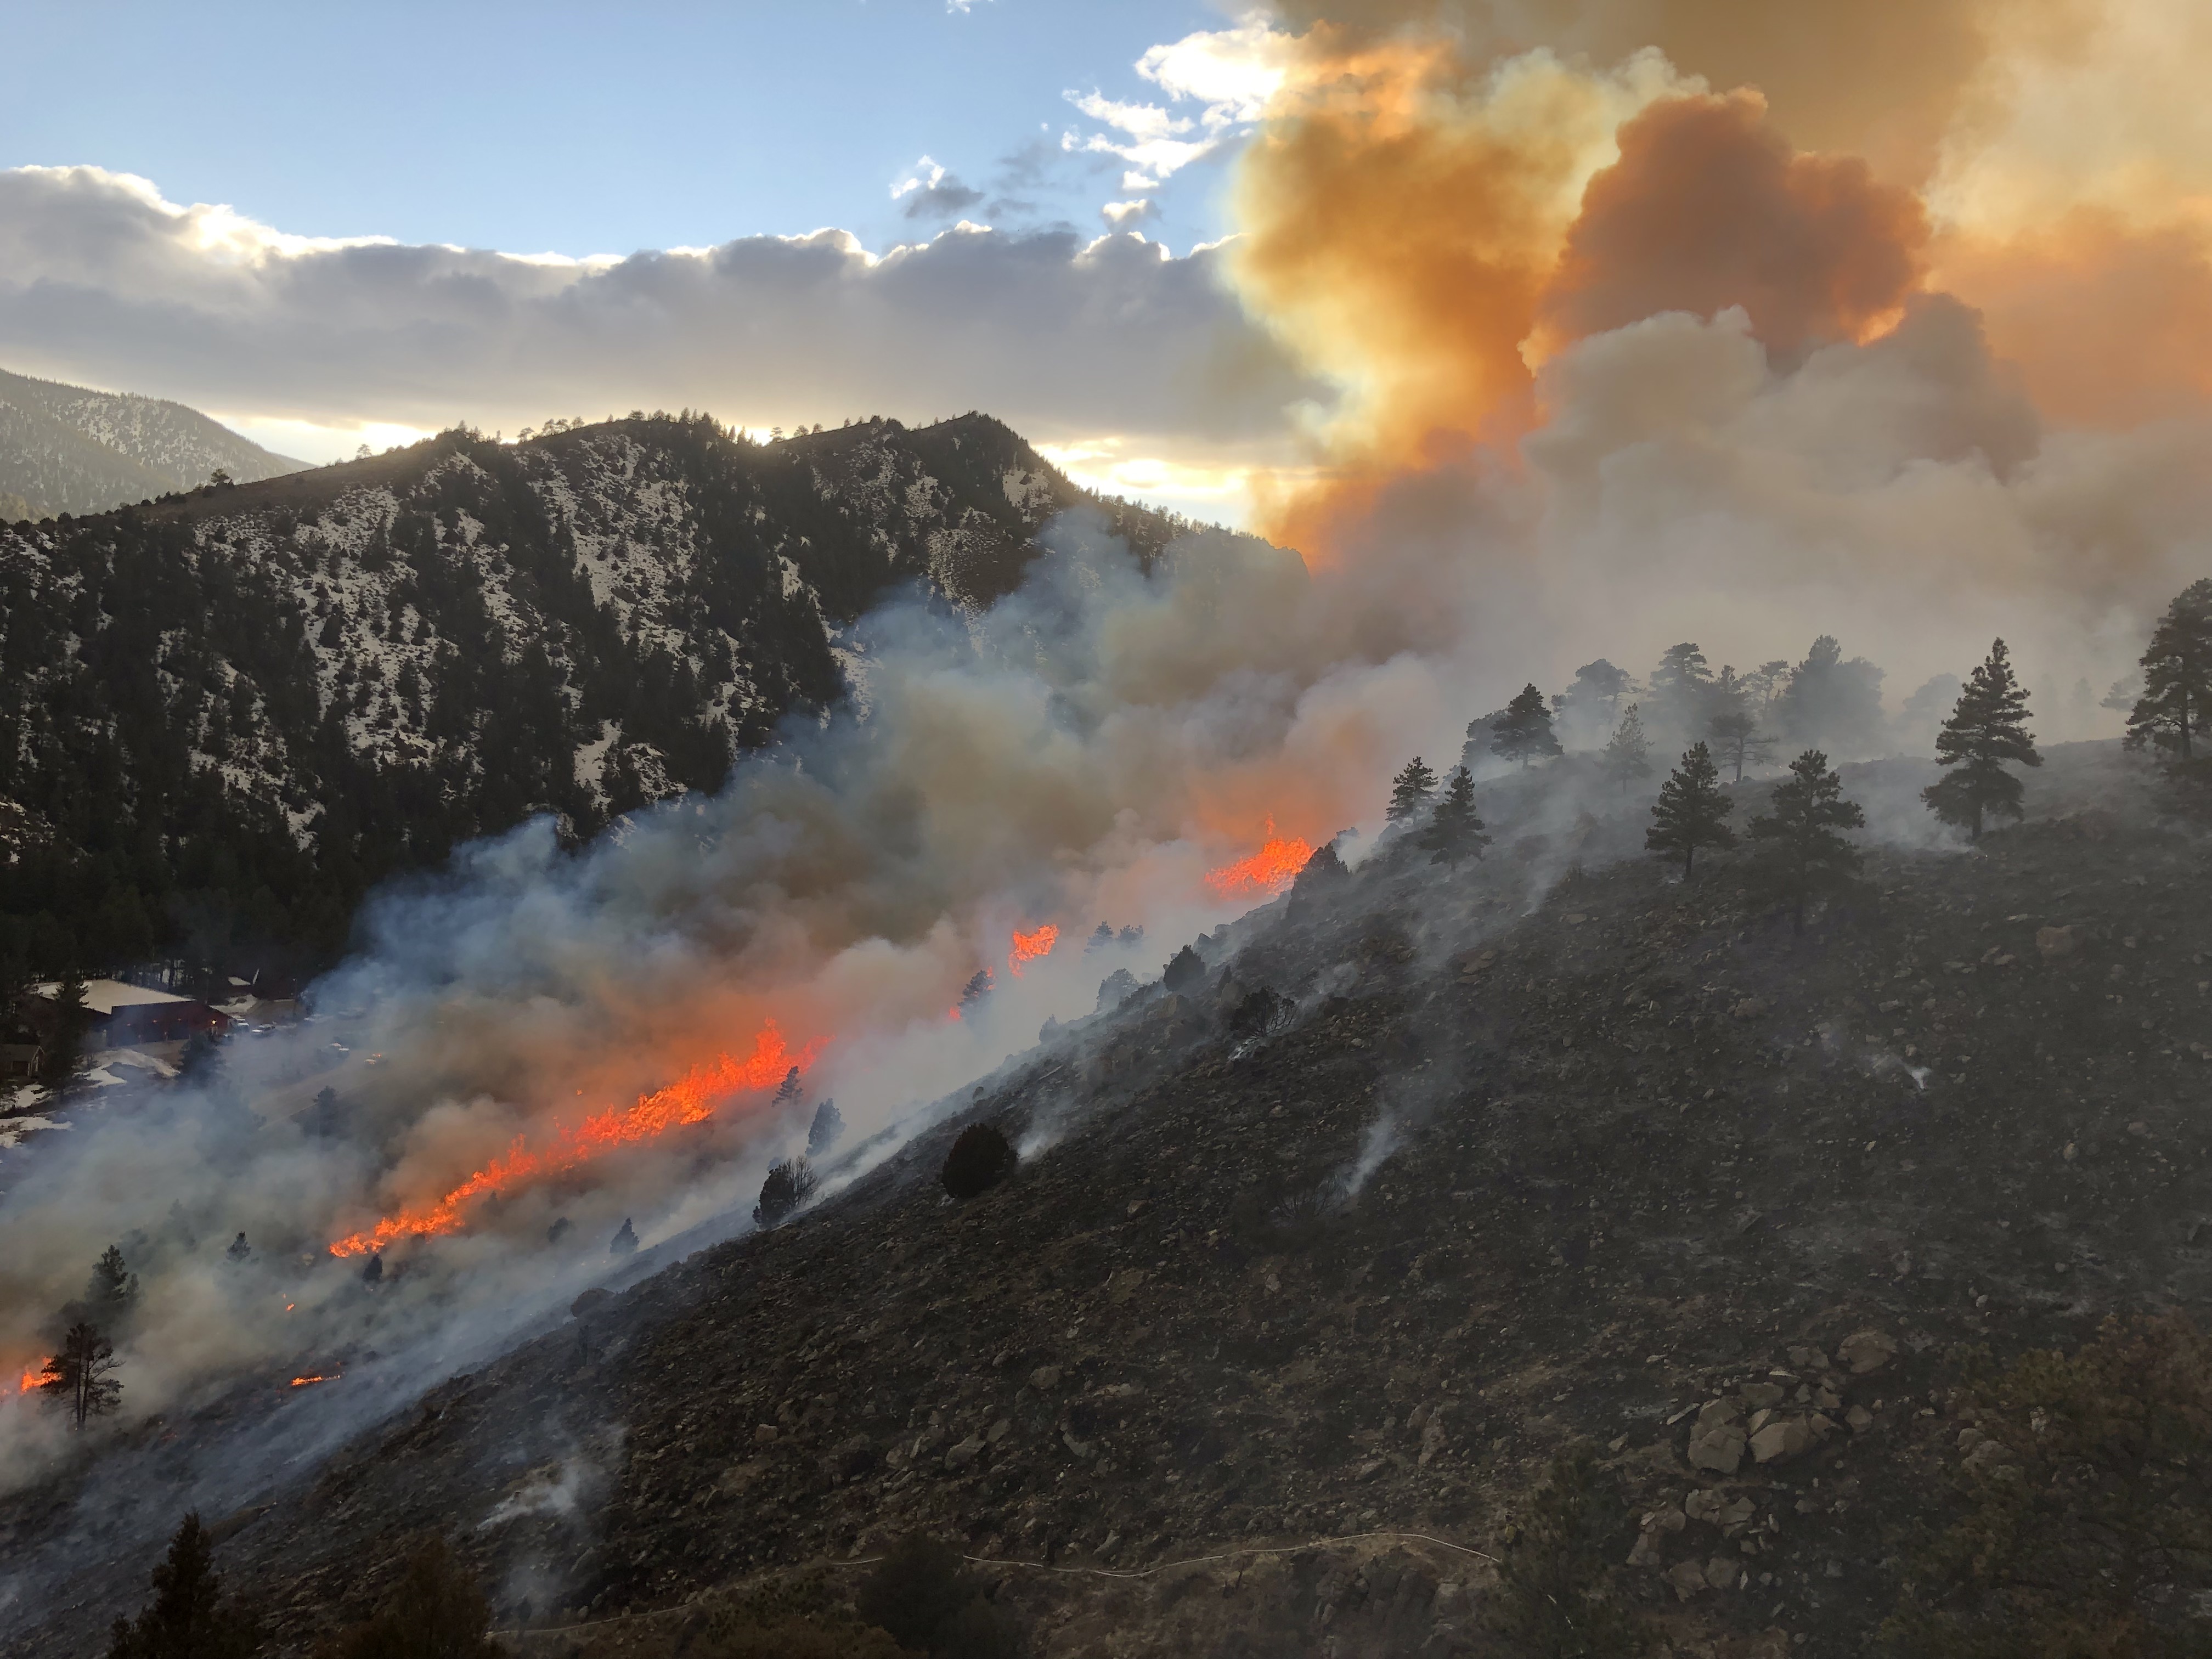 Photo of a wildfire burning vegetation up the side of a hill. The vibrant red and orange flames are consuming trees and releasing clouds of smoke into the sky, which are colored bright orange as they are backlit by the sun. The sky above the mountains is a bright blue, with a few atmospheric clouds present.